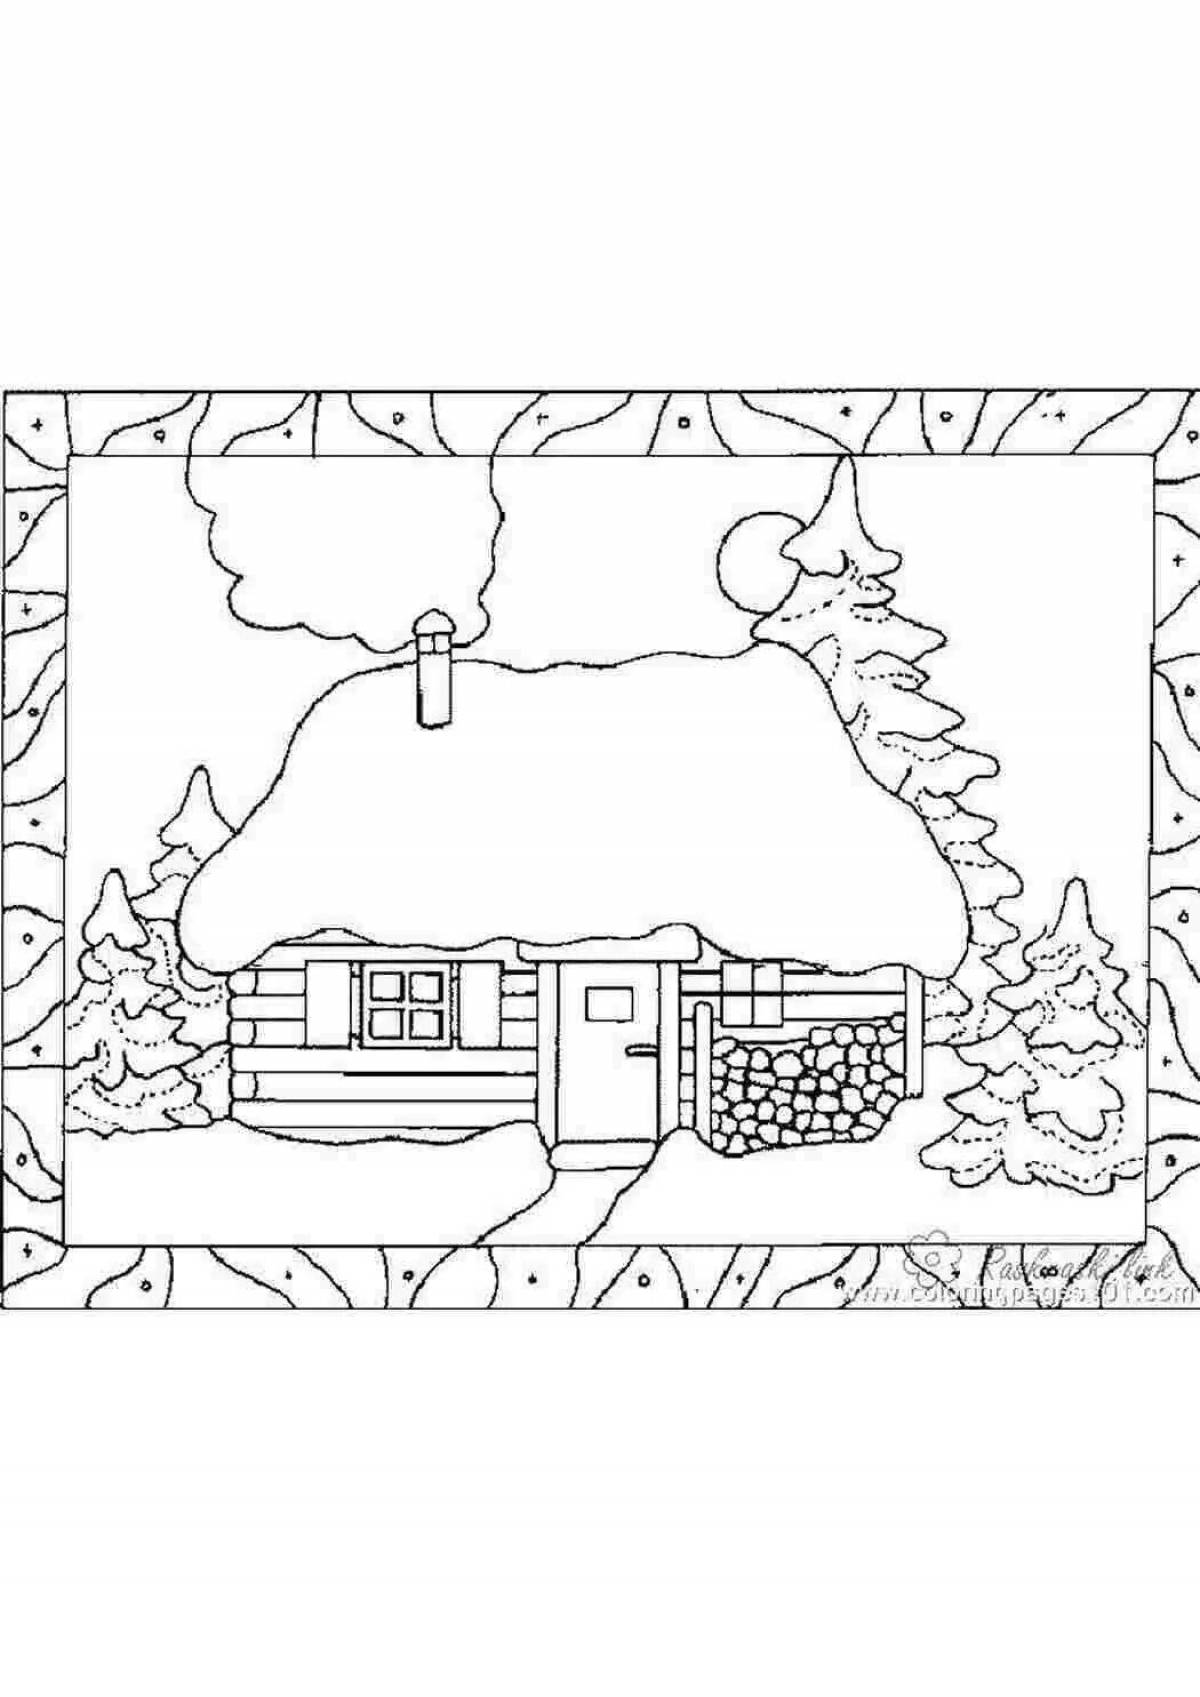 Coloring page blissful village in winter